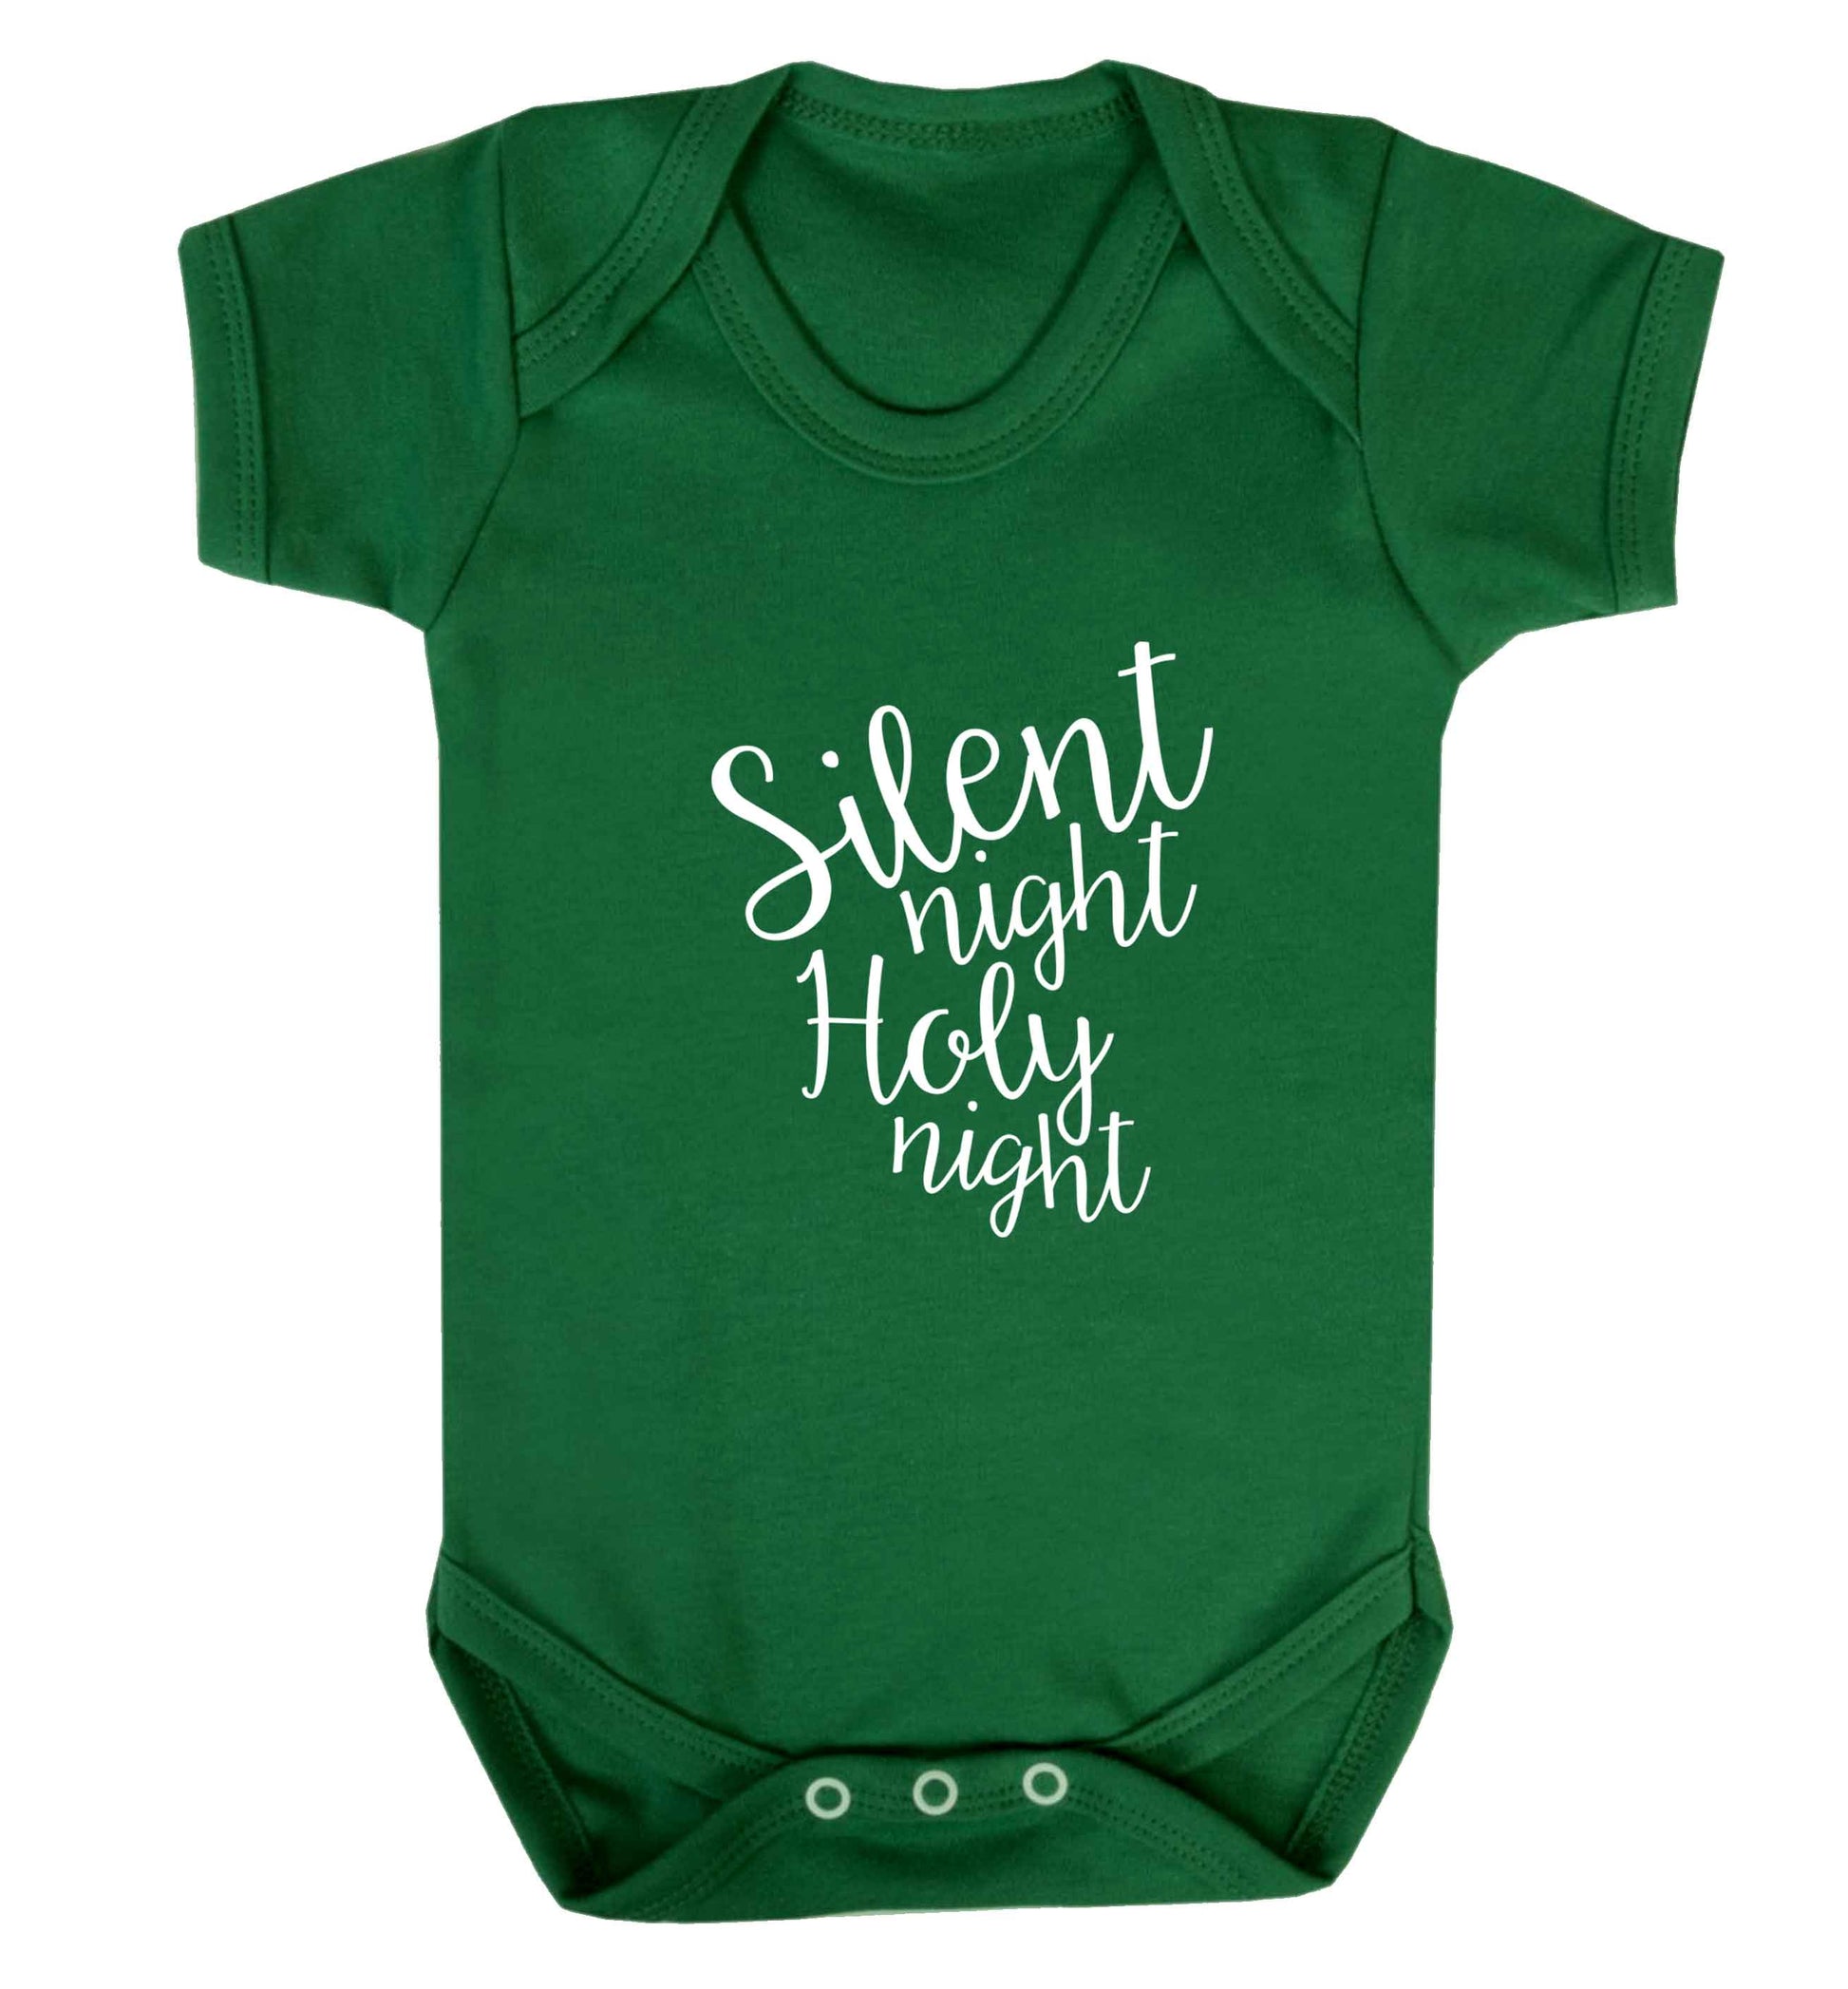 Silent night holy night baby vest green 18-24 months